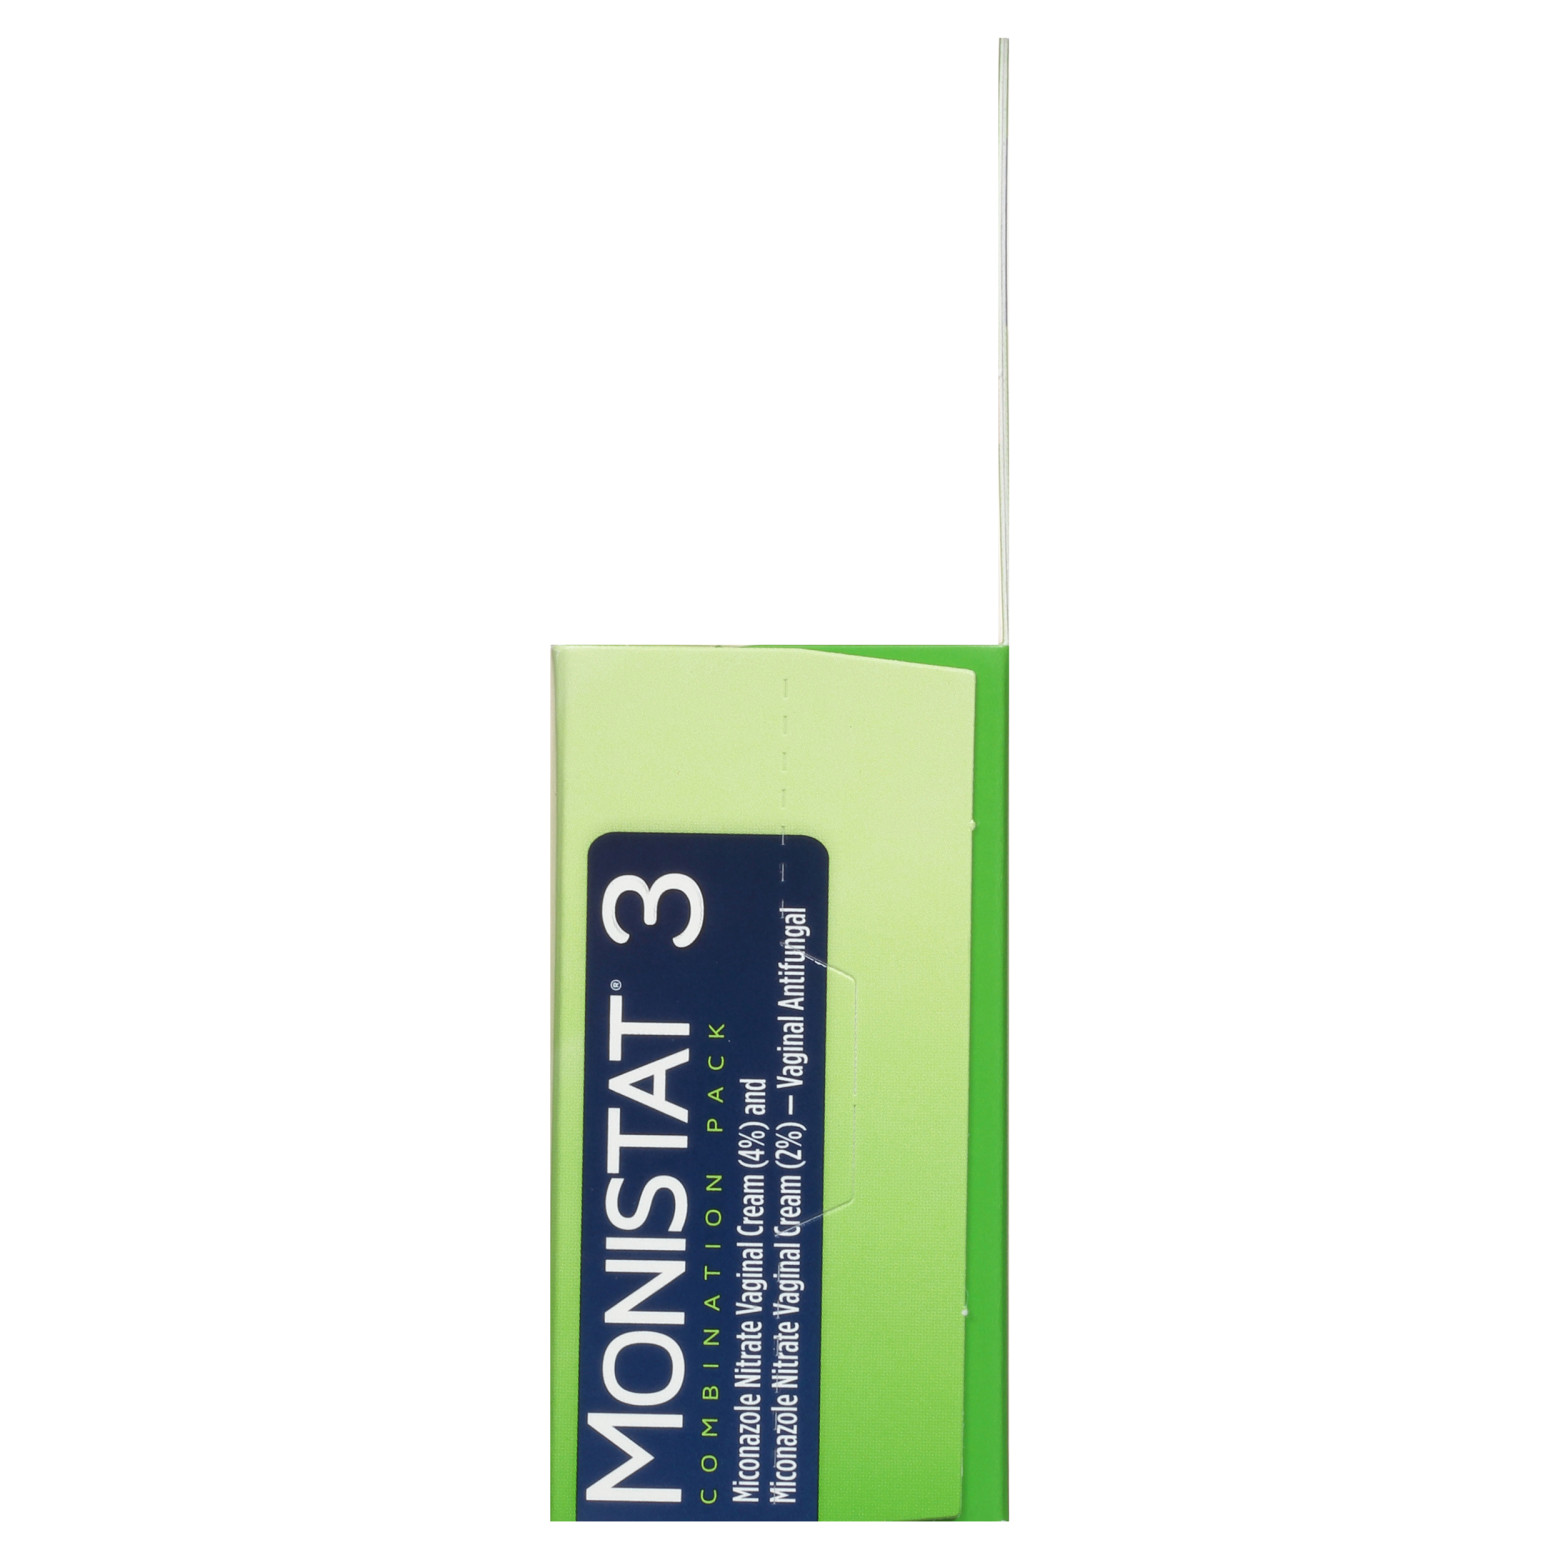 Monistat 3 Day Yeast Infection Treatment, 3 Miconazole Pre-Filled Cream Tubes & External Itch Cream - image 14 of 17